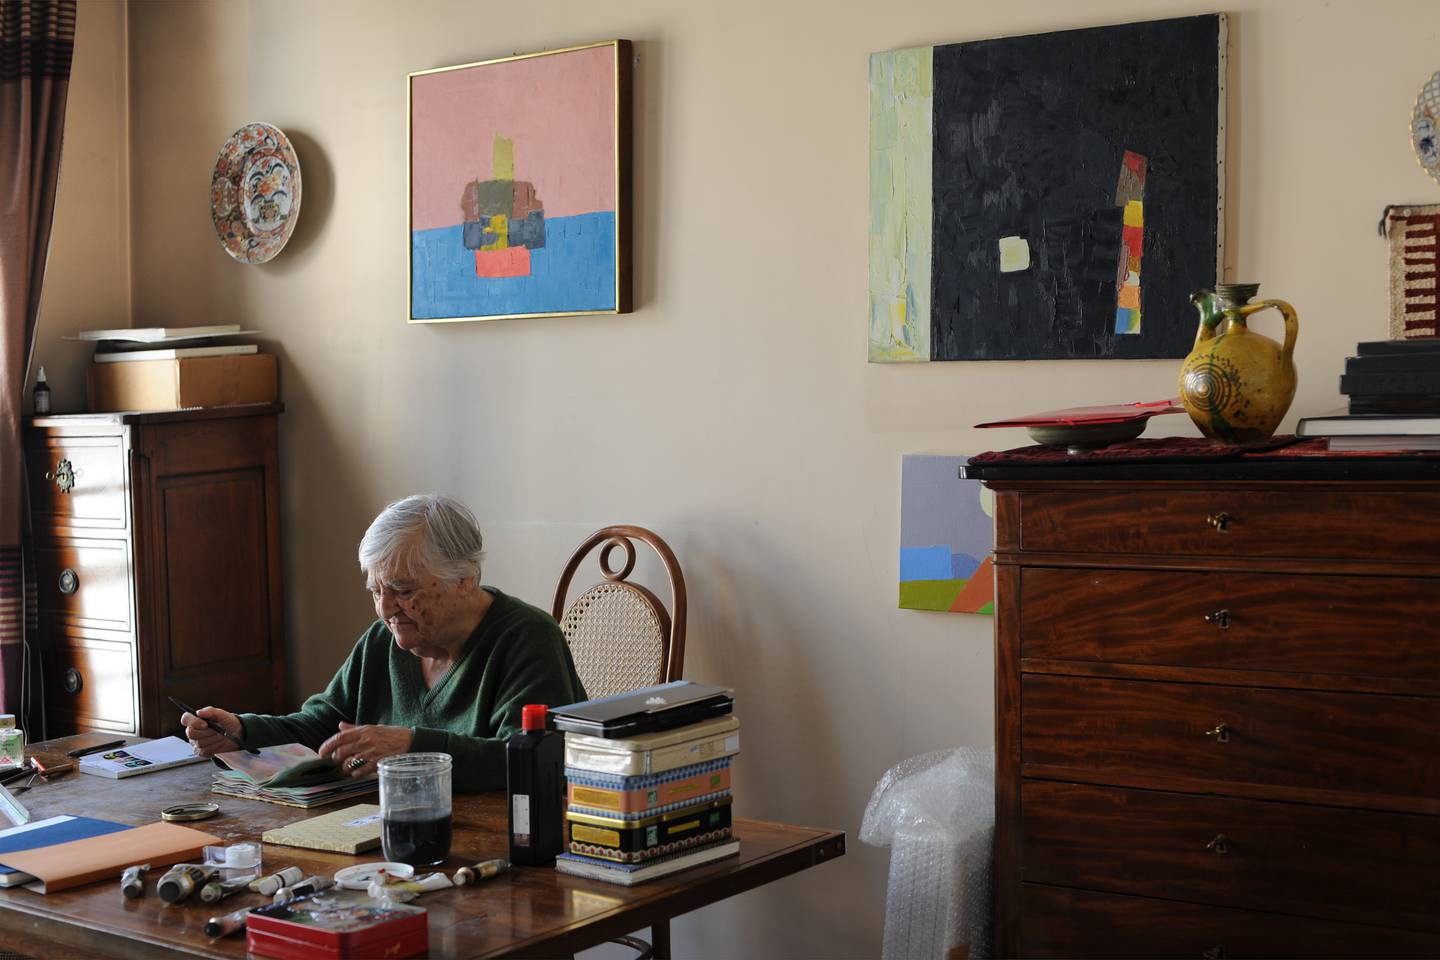 American-Lebanese artist and writer Etel Adnan at home in her studio workshop on April 8, 2015 in Paris, France. Sygma via Getty Images